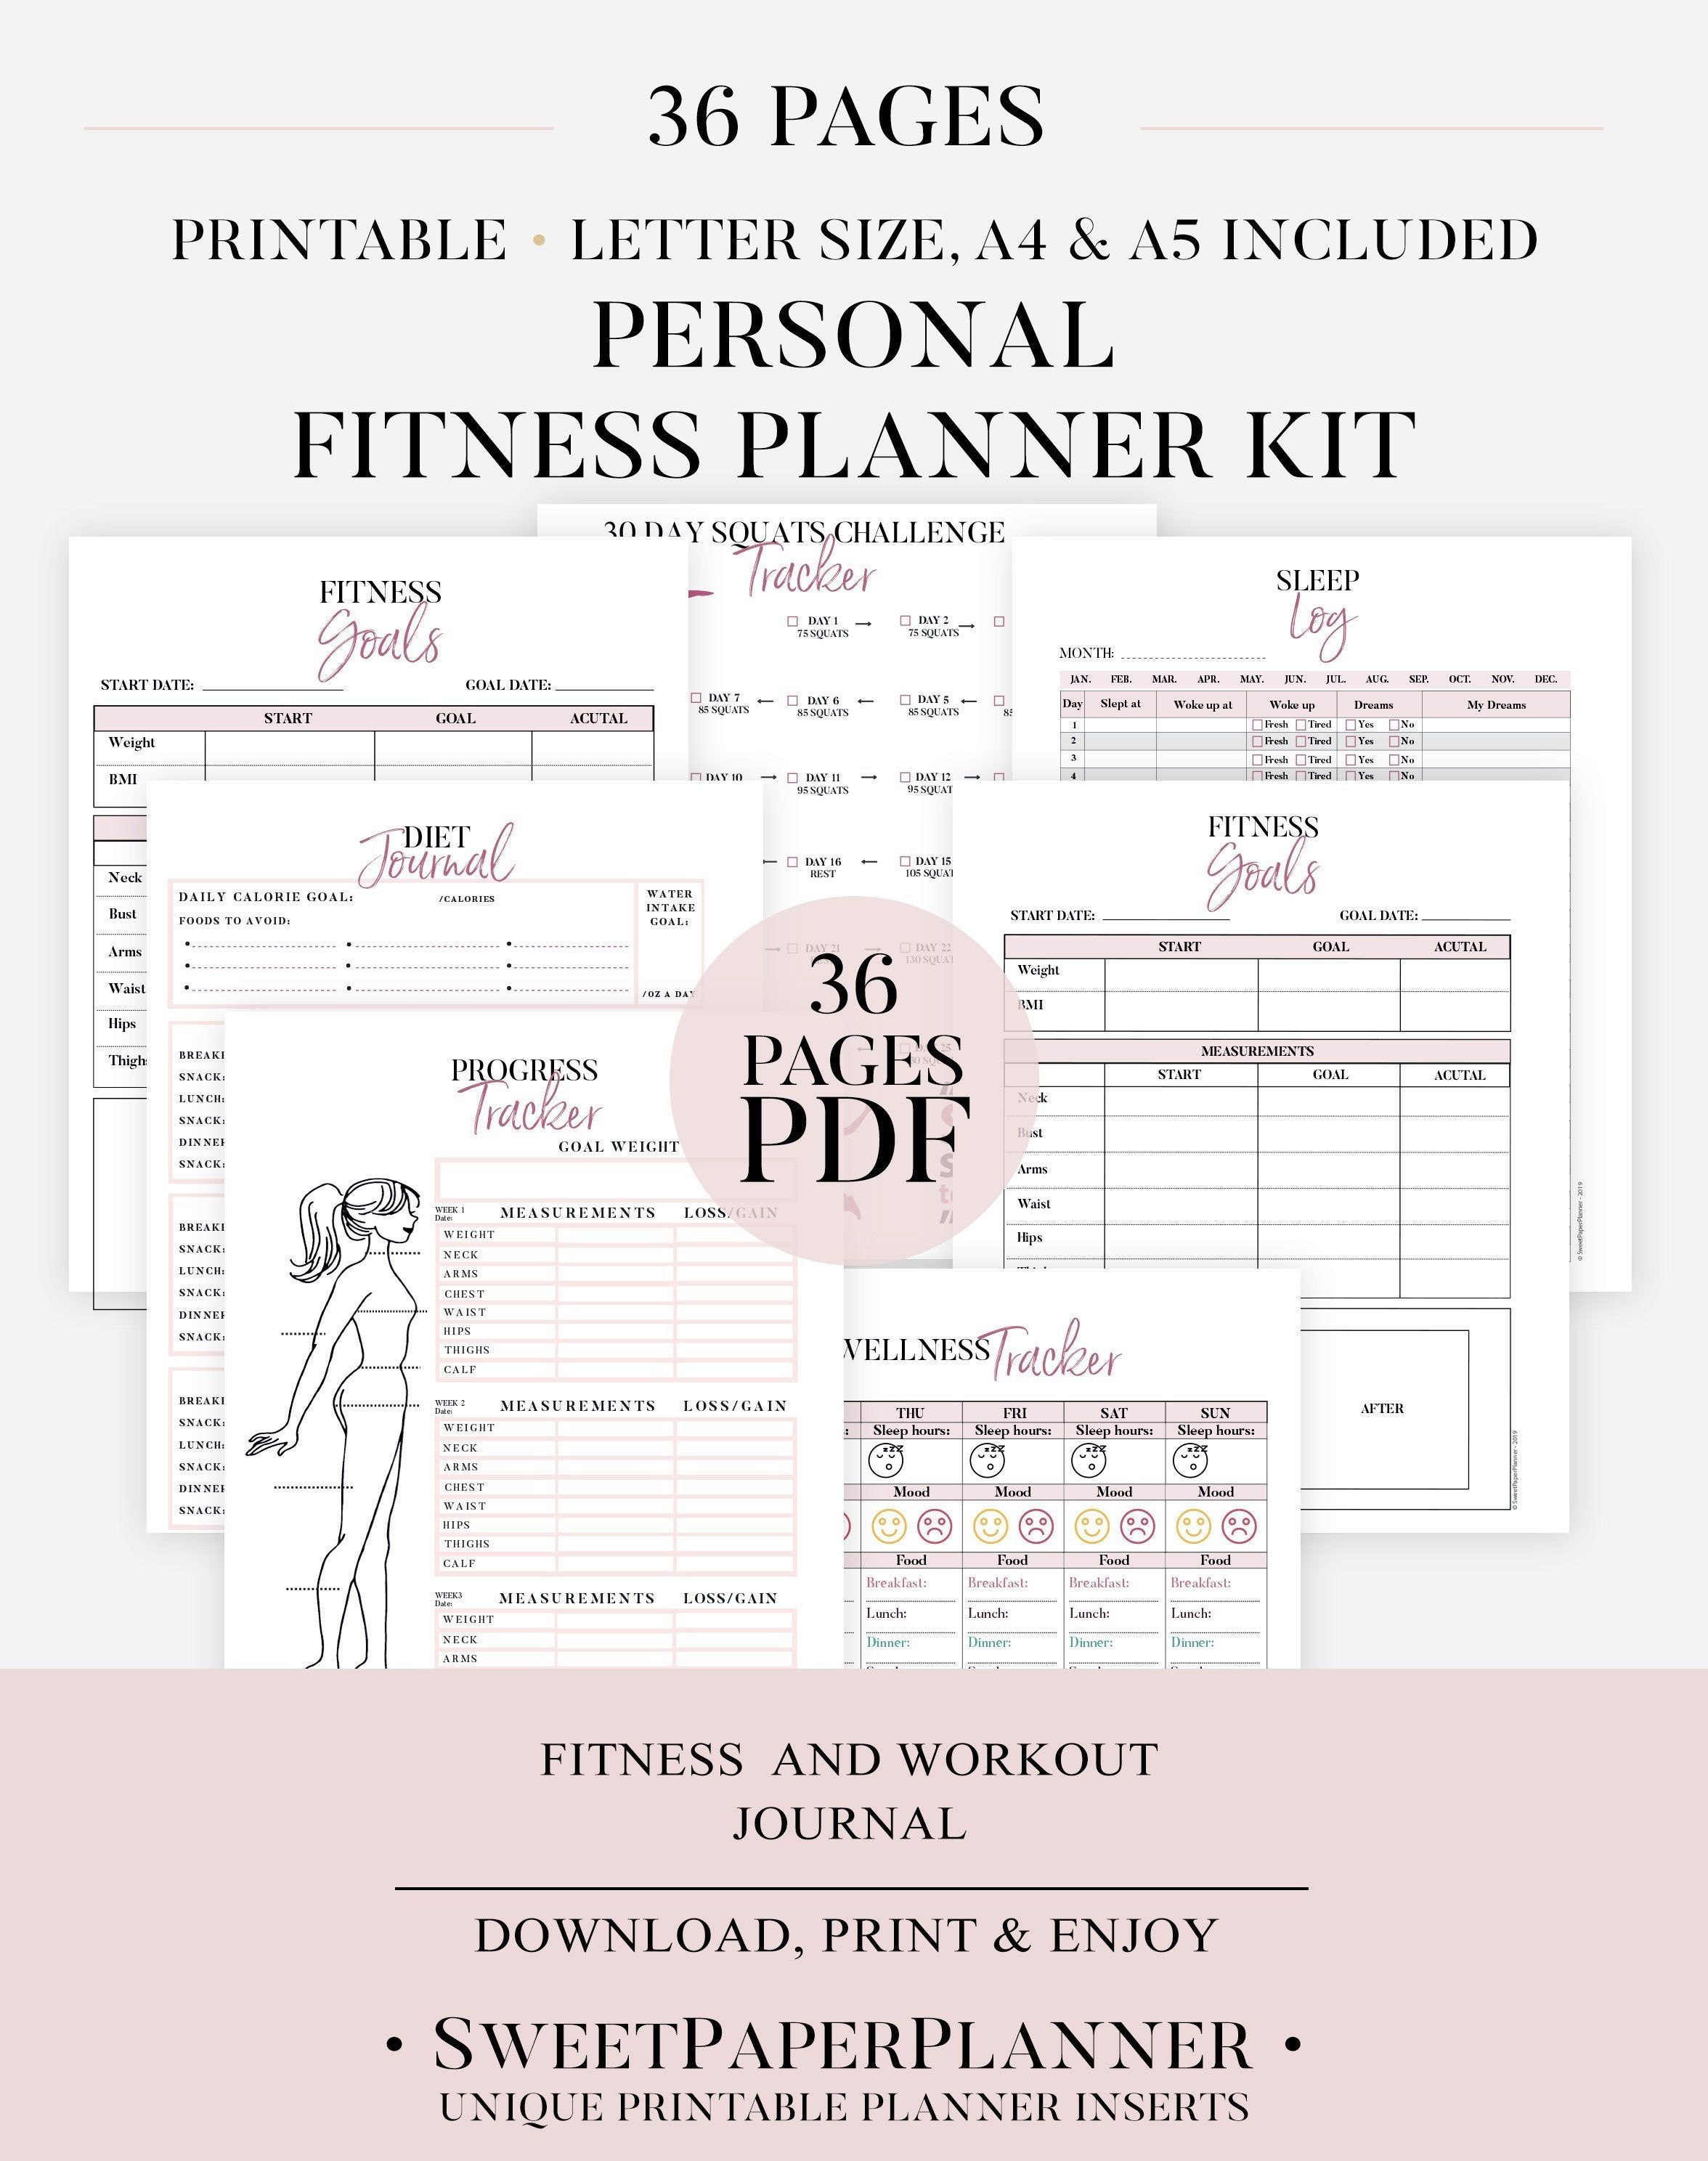 Ultimate Fitness Planner, Printable Health planner Bundle, Fitness Journal, Workout Log, Food And Exercise Tracker, 30 Day Squats Challenge - Ultimate Fitness Planner, Printable Health planner Bundle, Fitness Journal, Workout Log, Food And Exercise Tracker, 30 Day Squats Challenge -   16 fitness Journal food log ideas